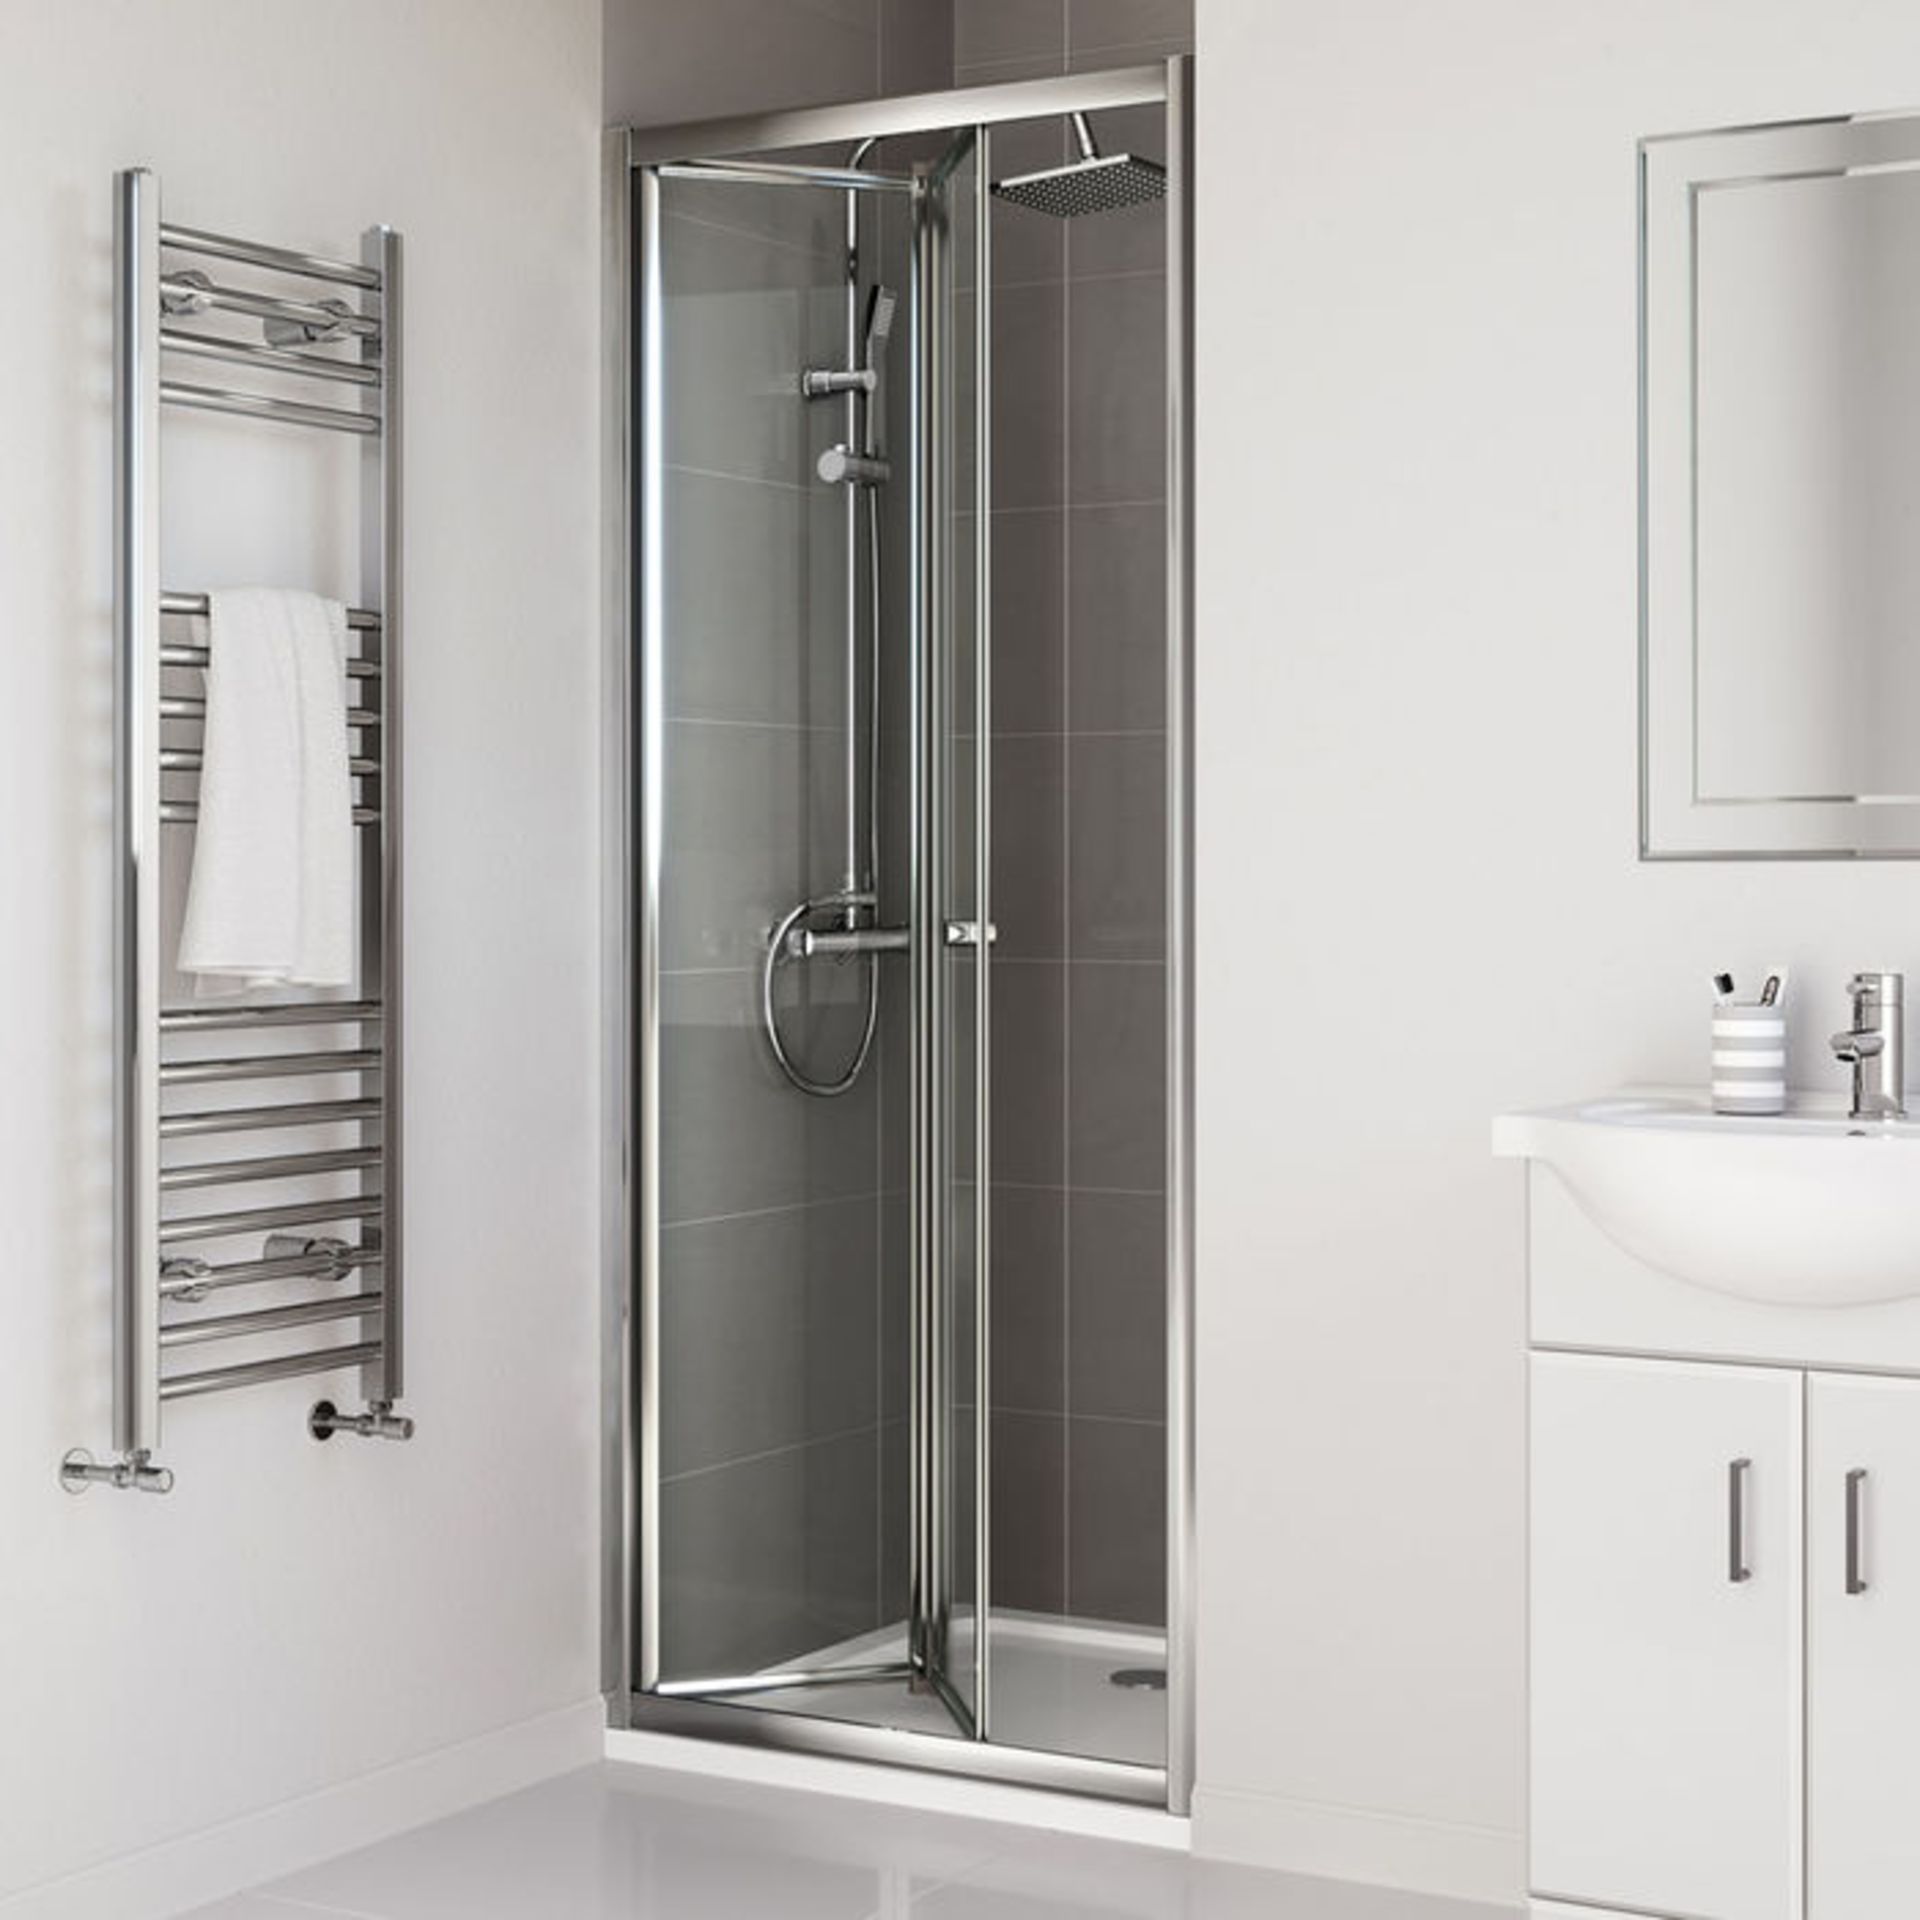 (C194) 760mm - Elements Bi Fold Shower Door. RRP £299.99. 4mm Safety Glass Fully waterproof tested - Image 2 of 2